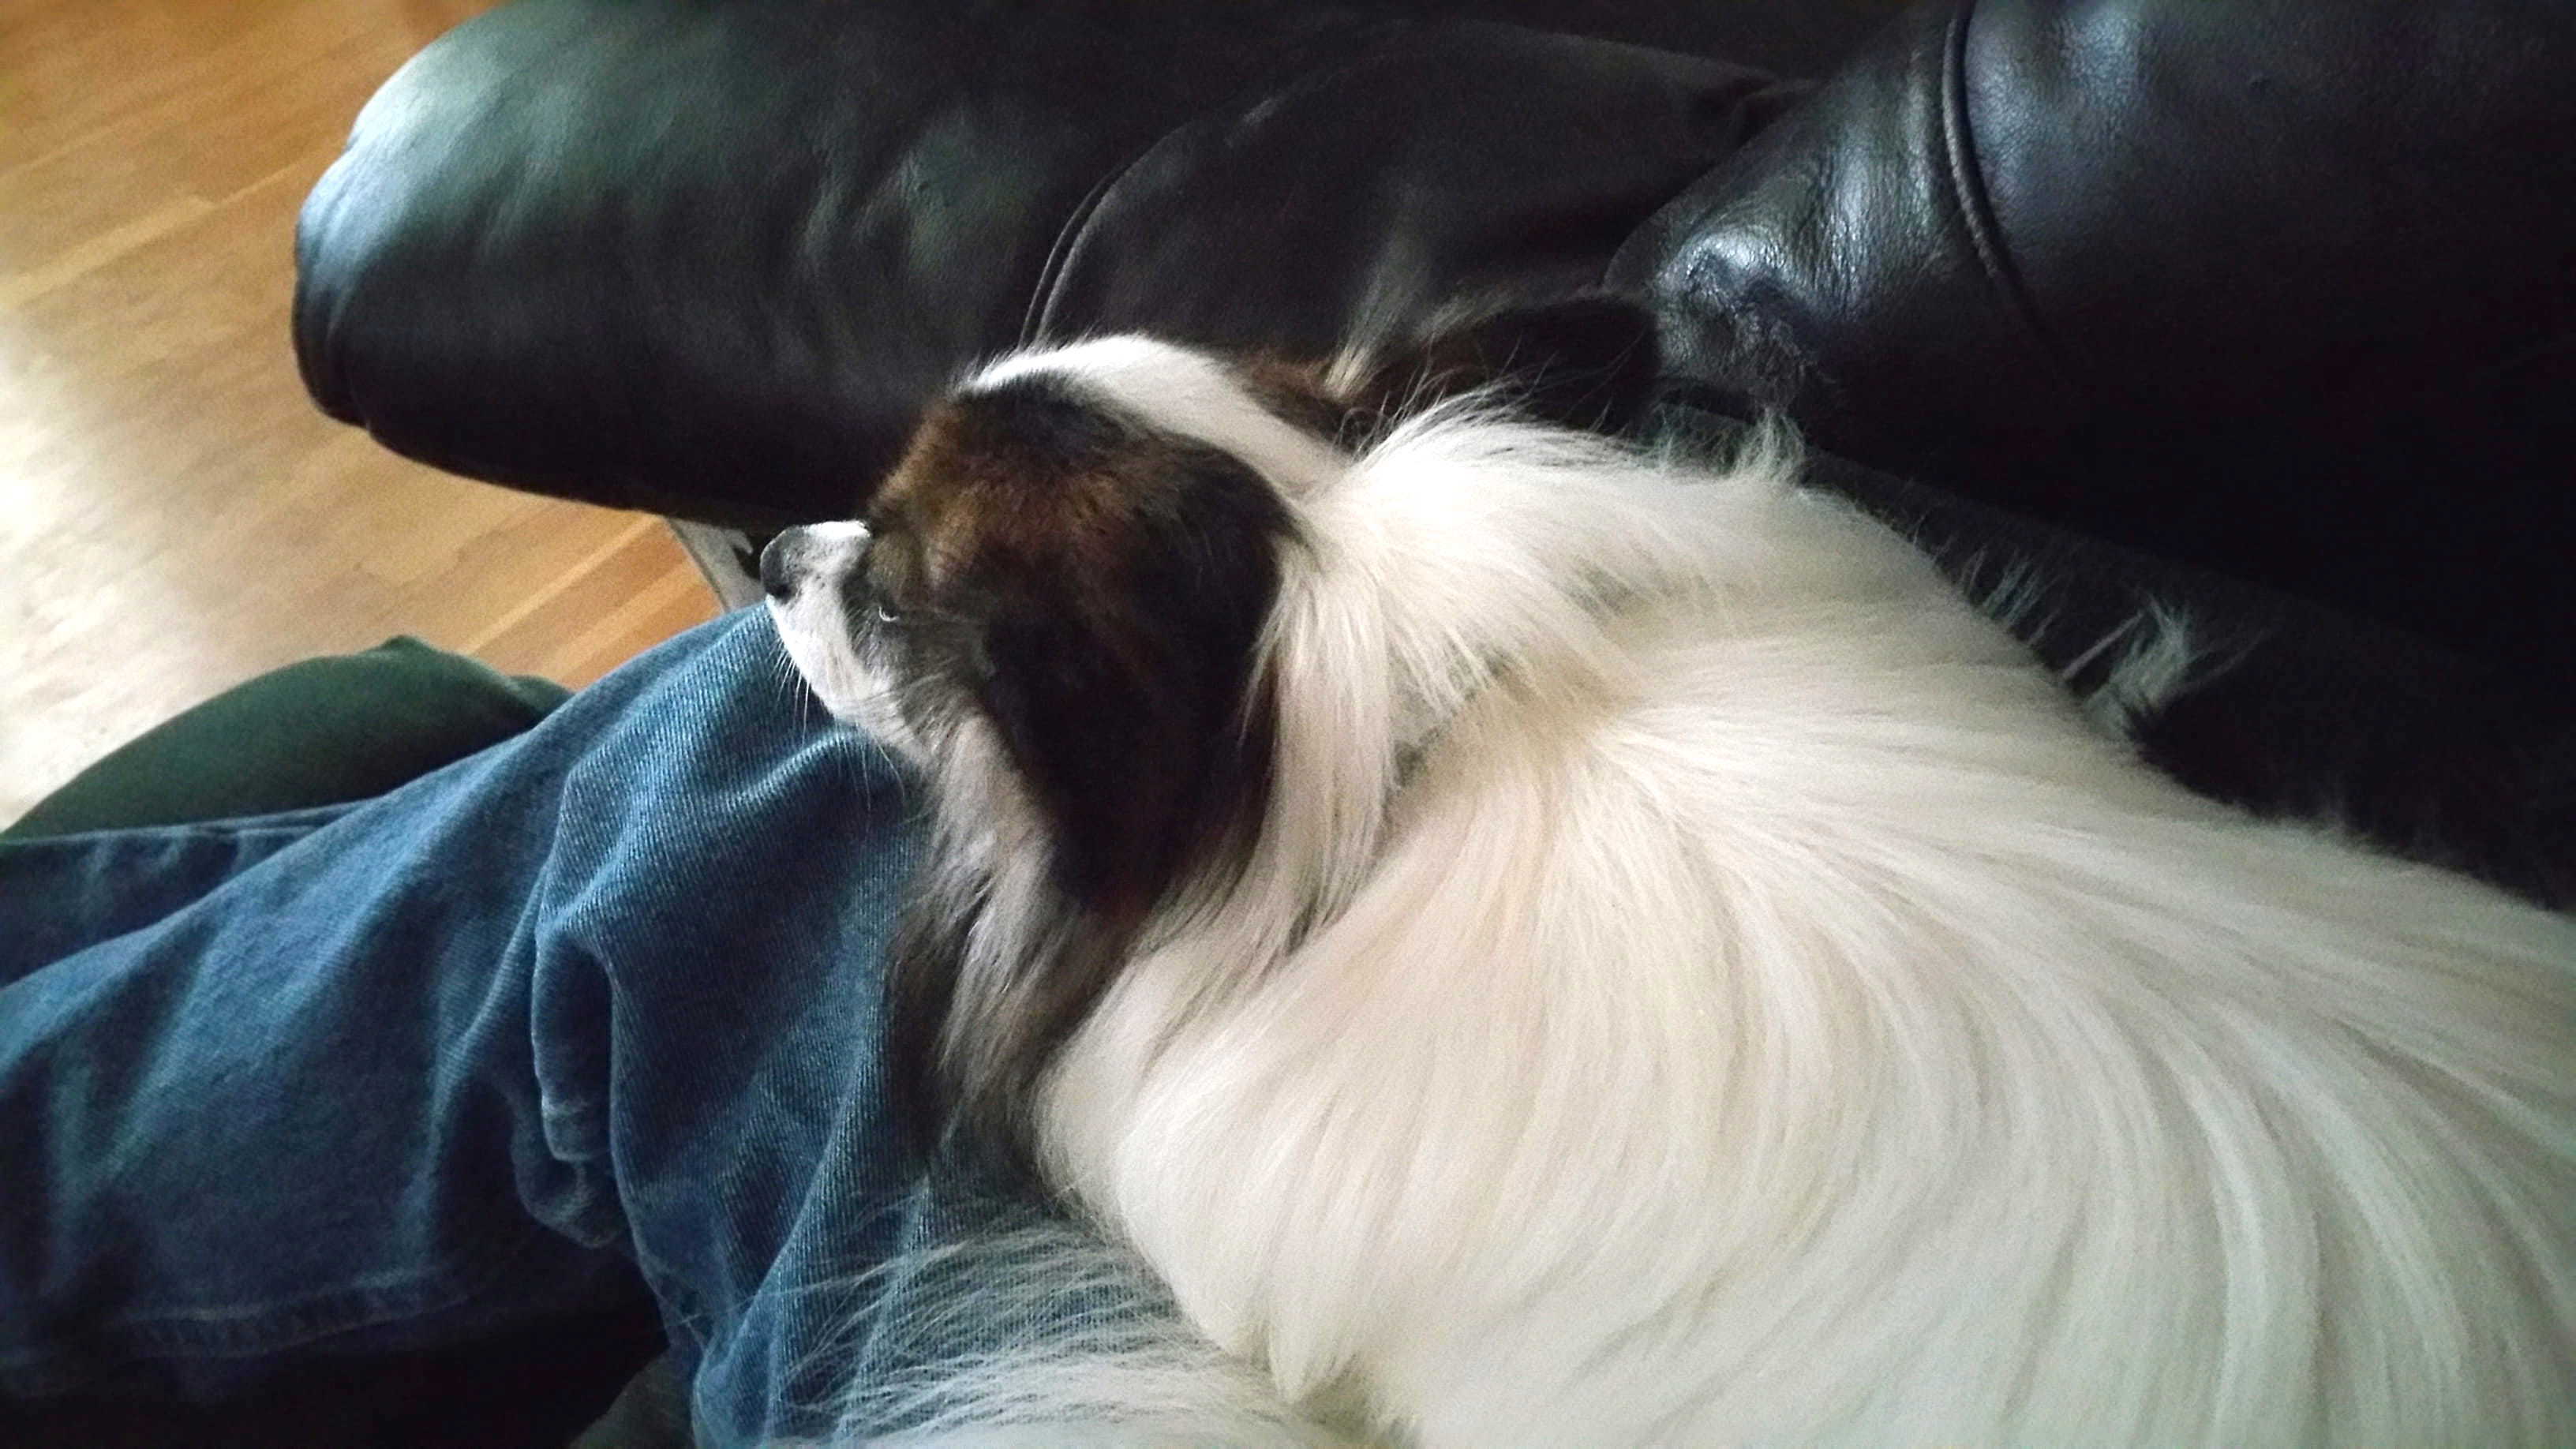 papillon comforting owner by laying on lap on couch